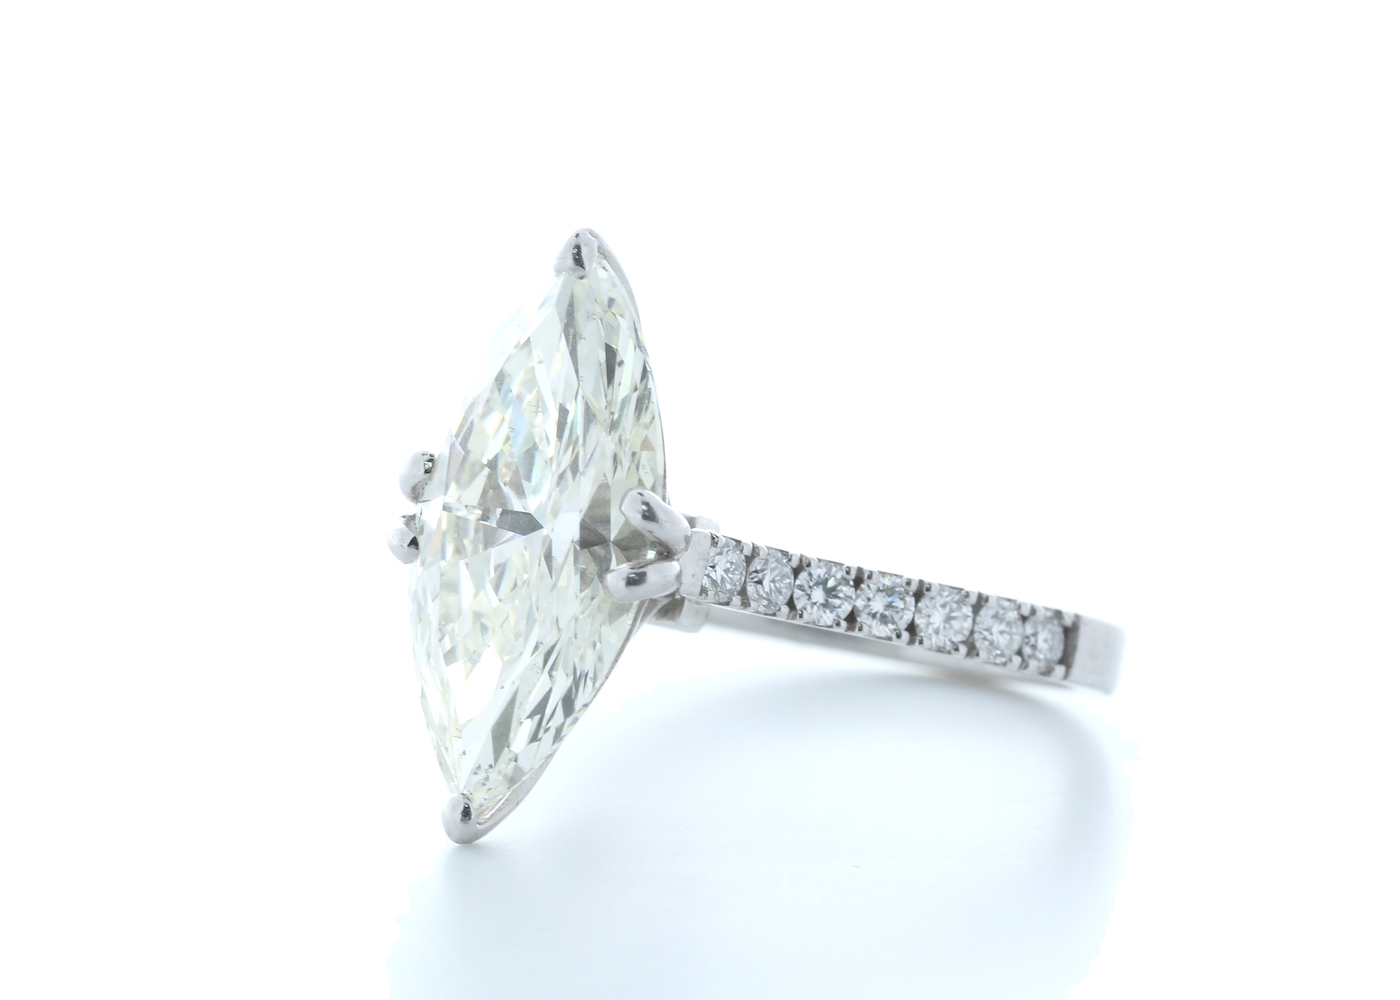 18ct White Gold Marquise Cut Diamond Ring 5.70 Carats - Image 2 of 5